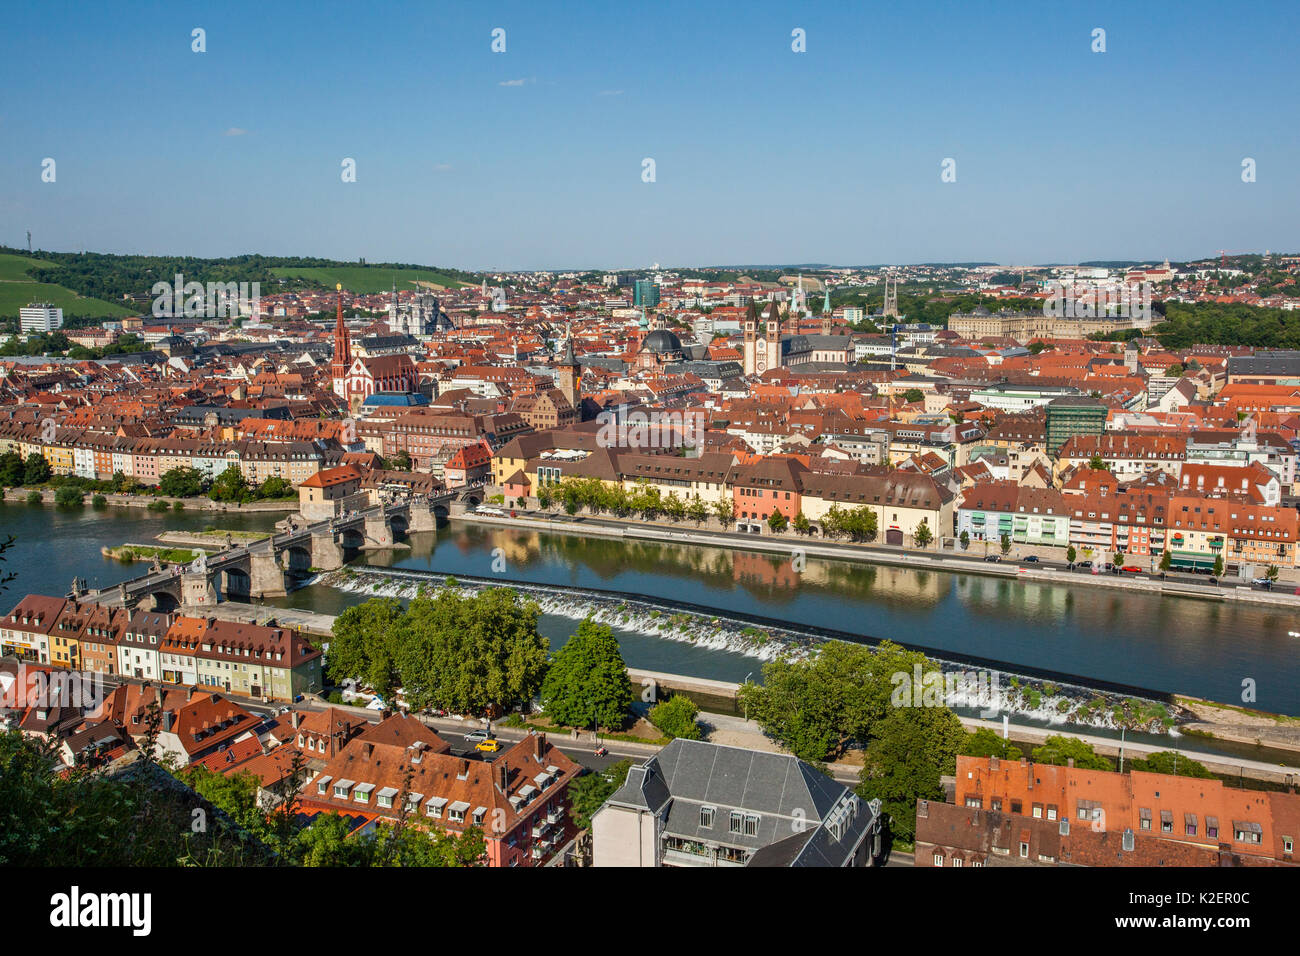 Germany, Bavaria, Lower Franconia region, view of Würzburg from Fortress Marienberg with Main River, Mainkai and the waterway lockage at the old Main  Stock Photo